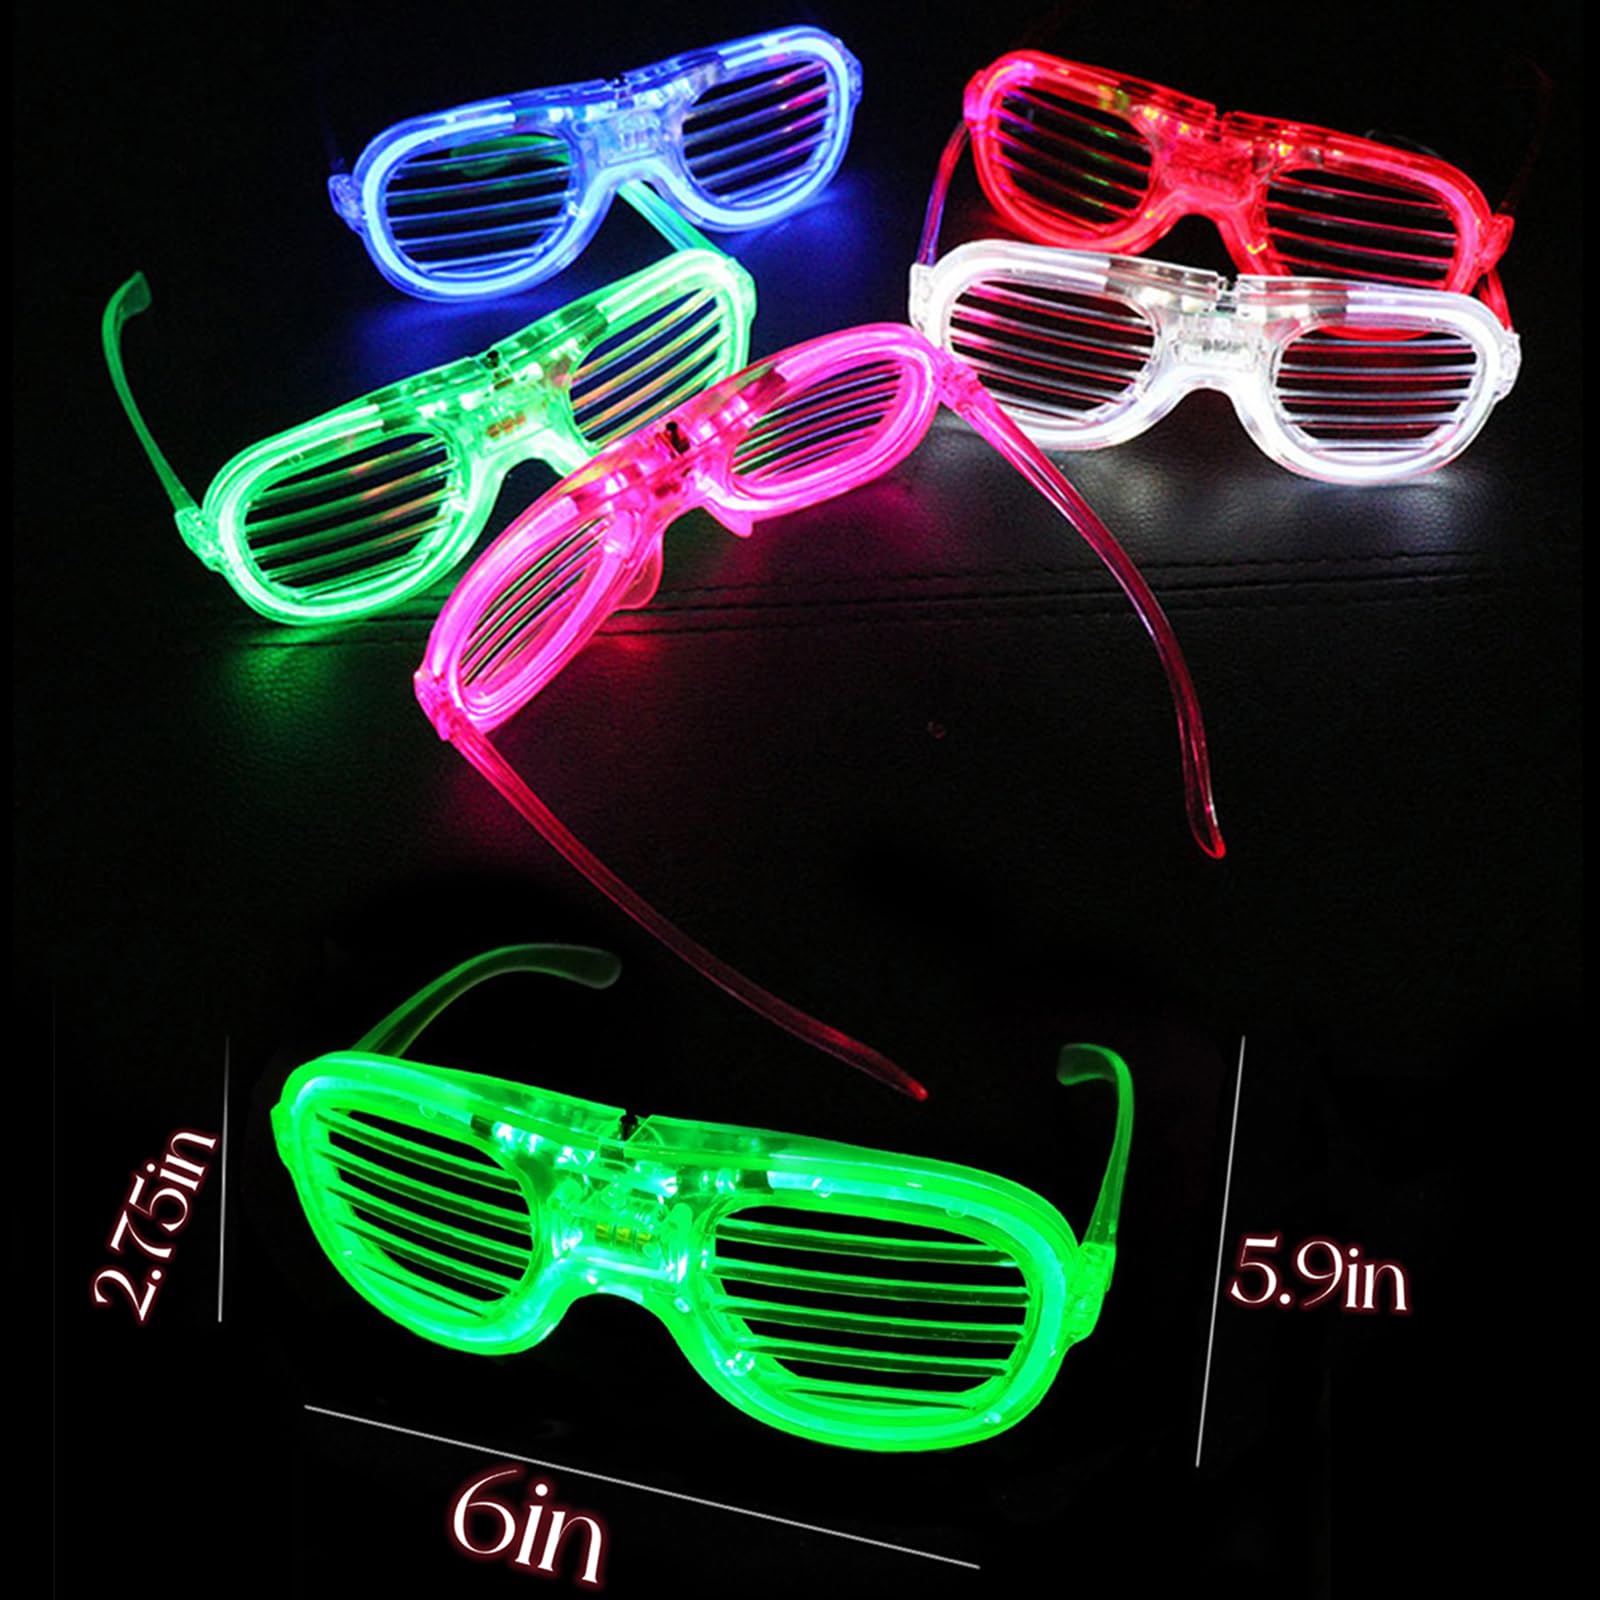 25 Packs LED Glasses 5 Neon Colors glow in the dark party supplies Favor for Kids Adult Glow sticks Light Up Glasses fit Holiday Birthday Valentine's Day and Halloween Party Supplies Cosplay Christmas